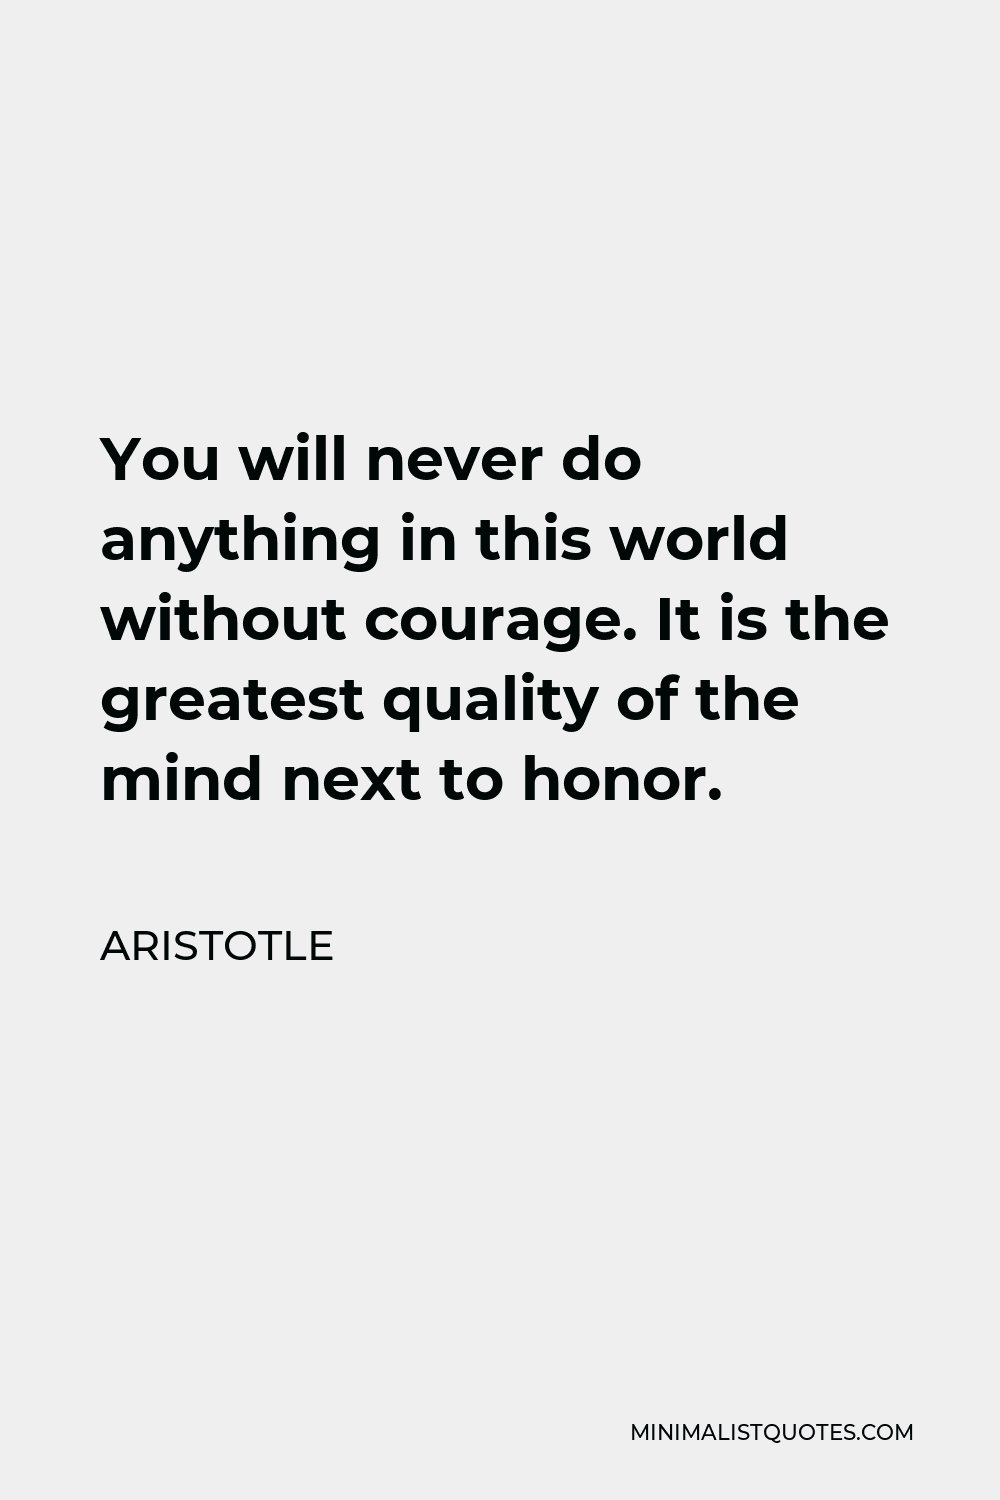 Aristotle Quote - You will never do anything in this world without courage. It is the greatest quality of the mind next to honor.